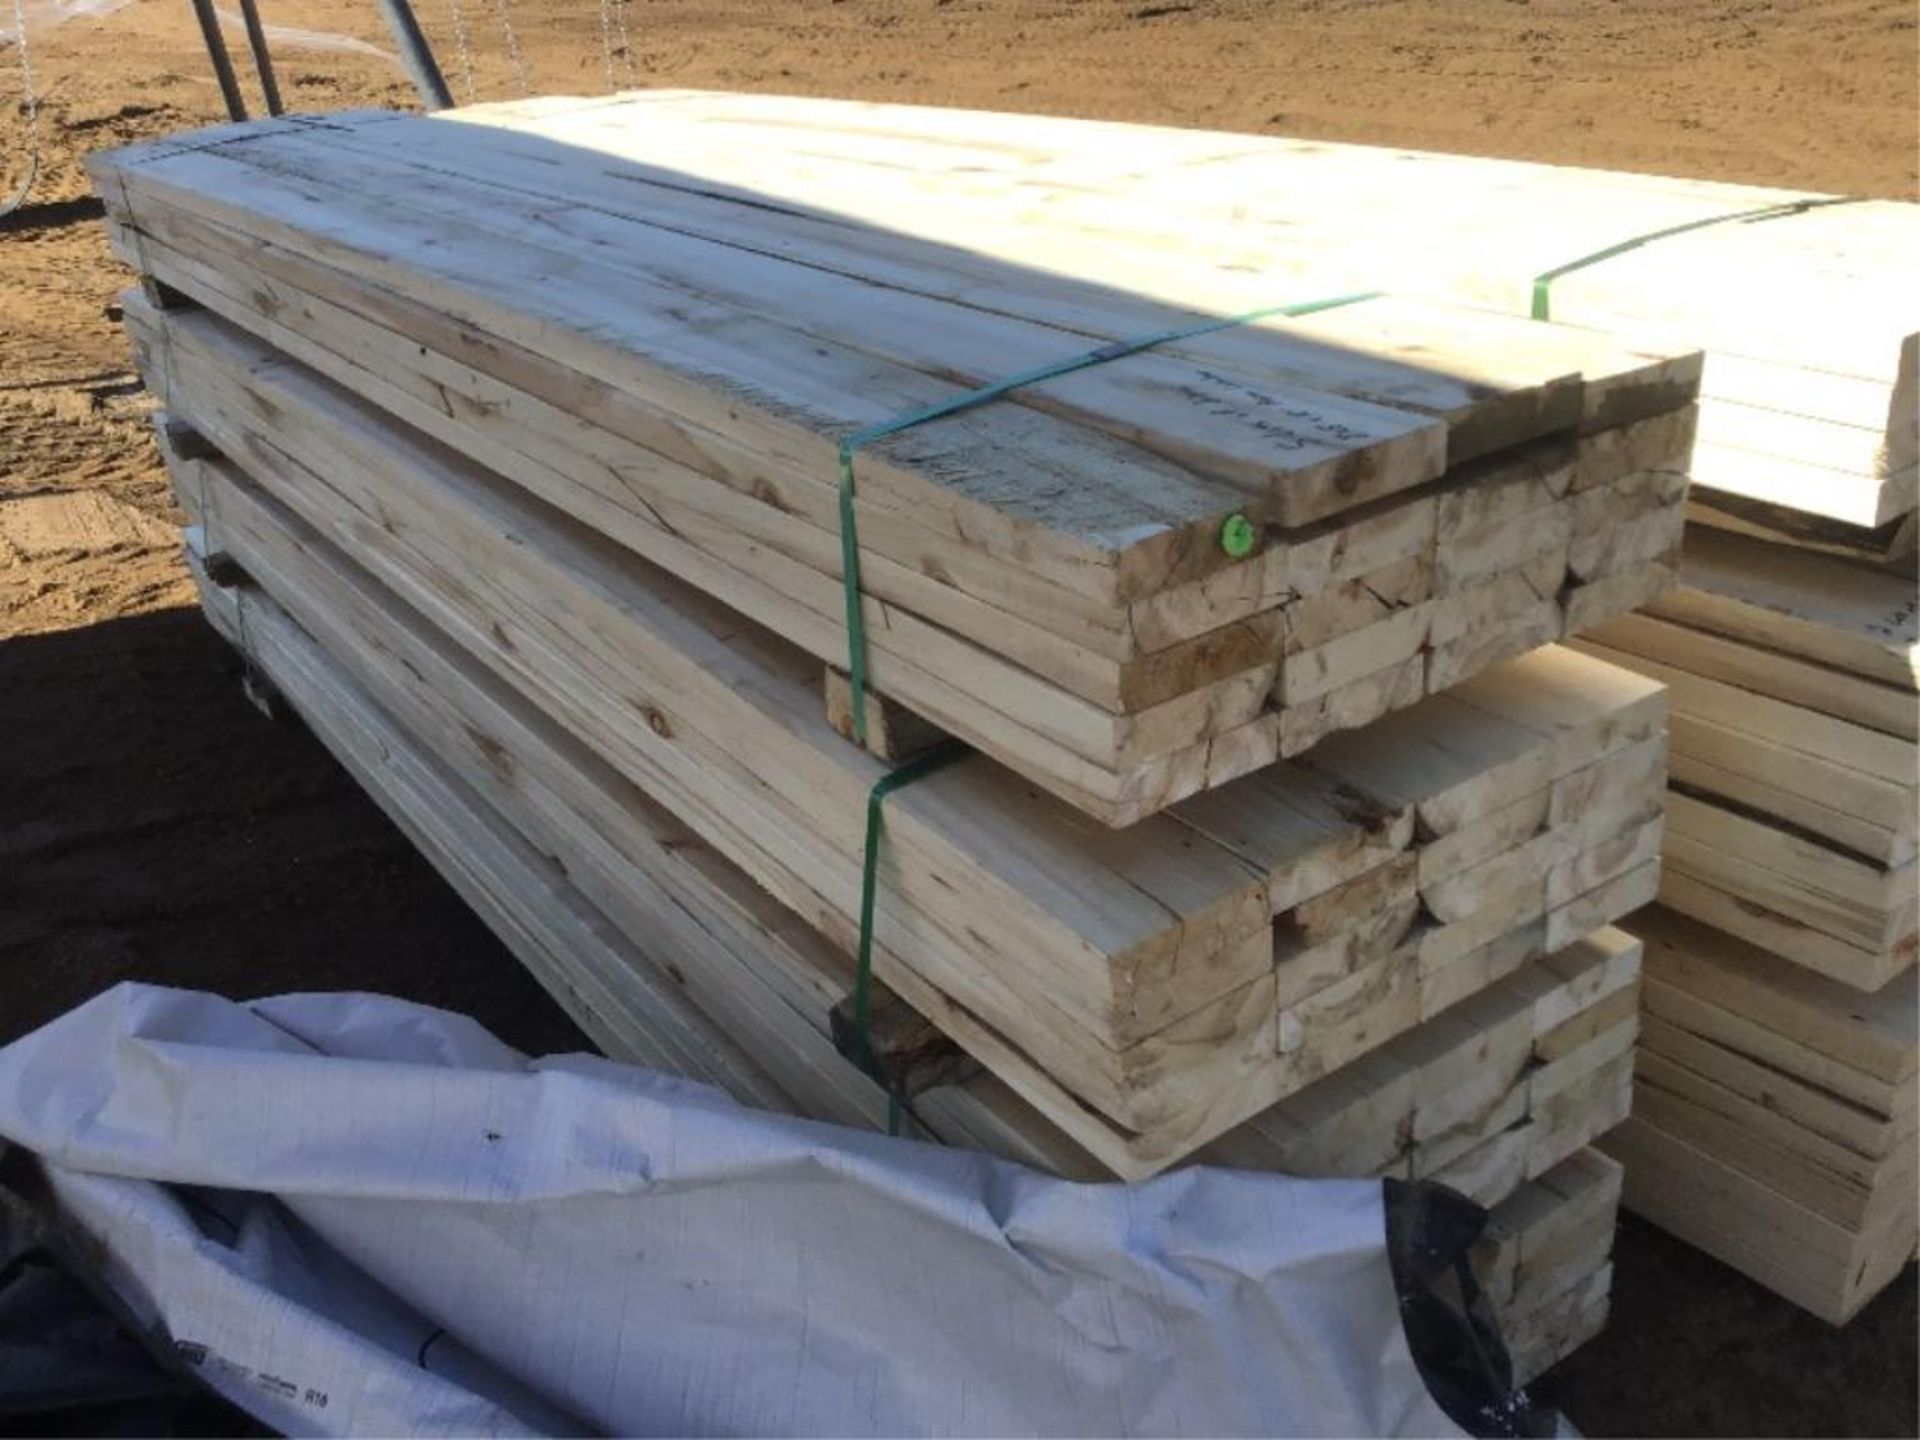 190 20pc of 2"x6" x 10' Planed Aspen/Poplar Lumber Selling by the pc X 20. Lot #s' 188, 189, 190,